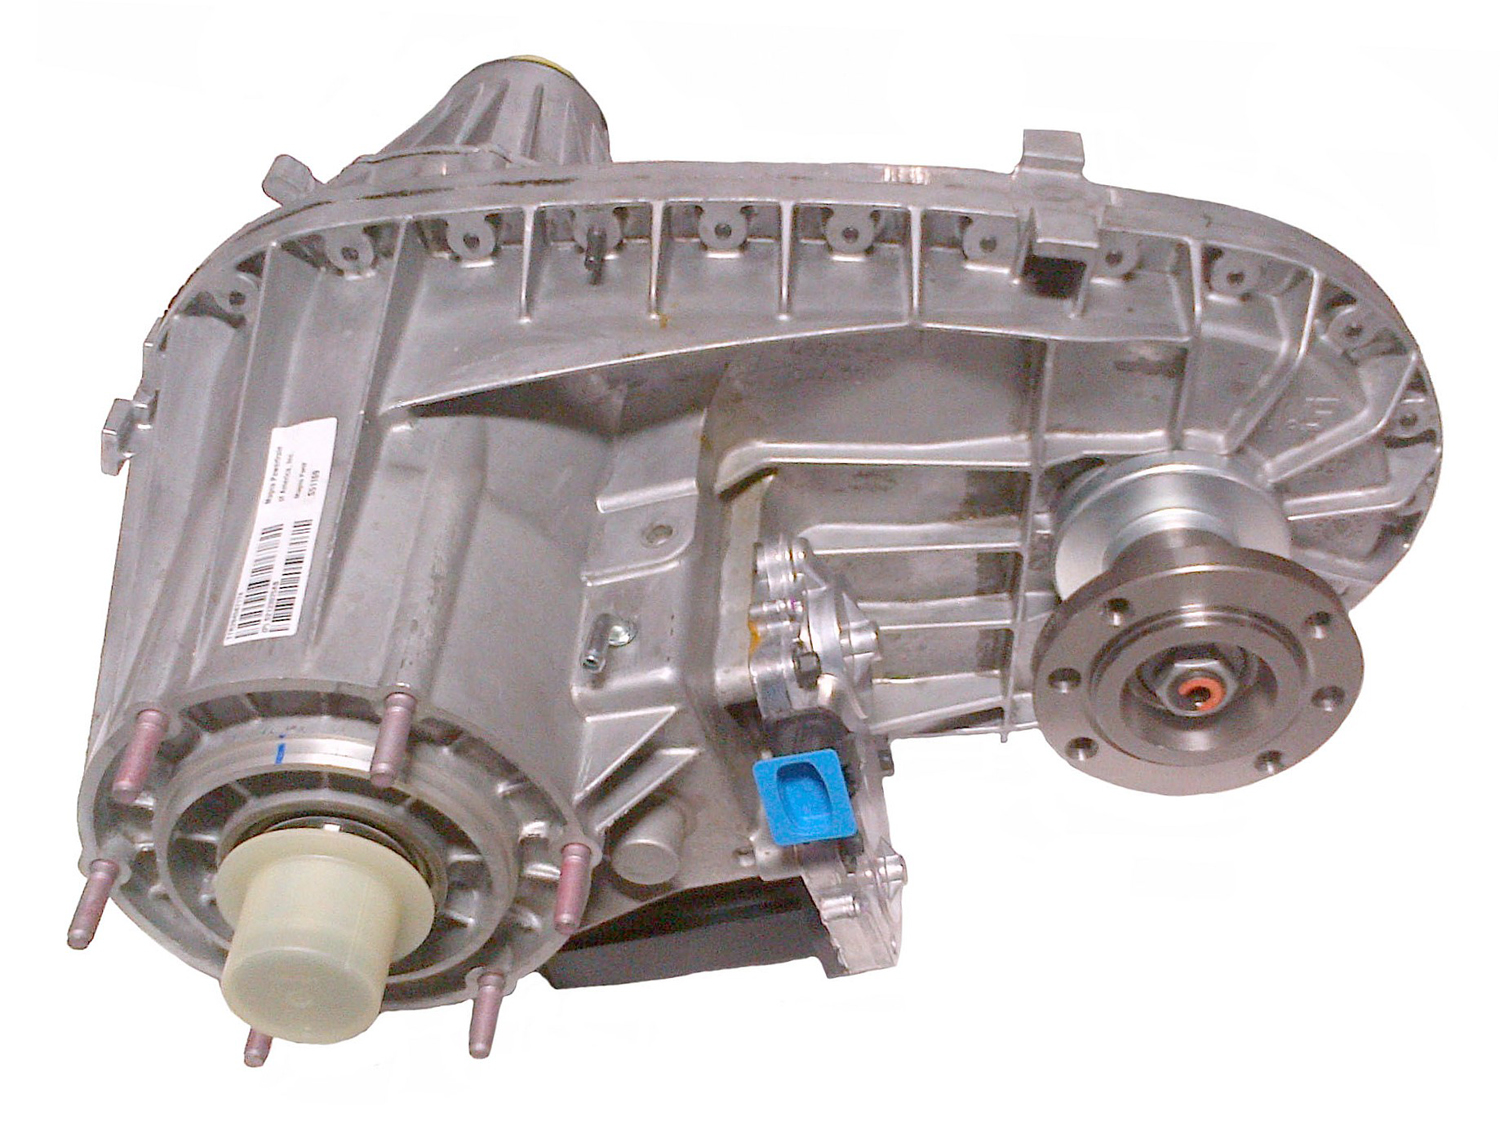 Zumbrota Remanufactured NP273 Transfer Case for 2006-2012 Ram 2500/3500 Series